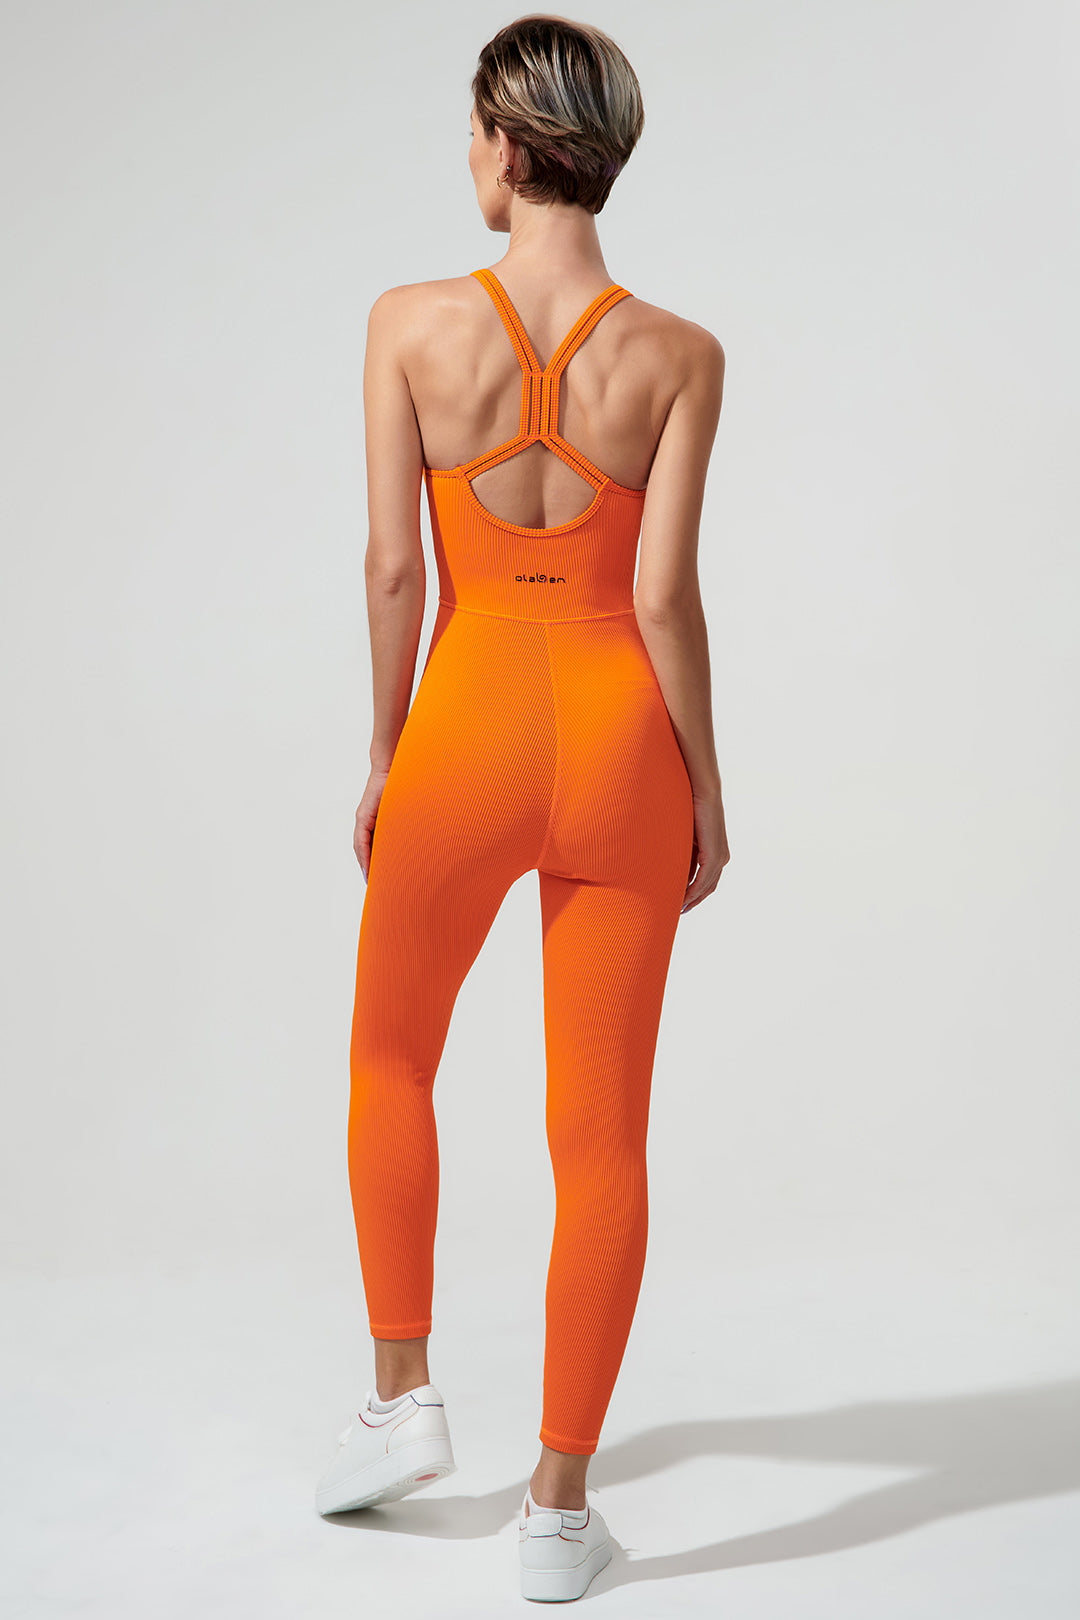 Stylish tangerine orange jumpsuit for women, perfect for a suave and pulpy fashion statement.